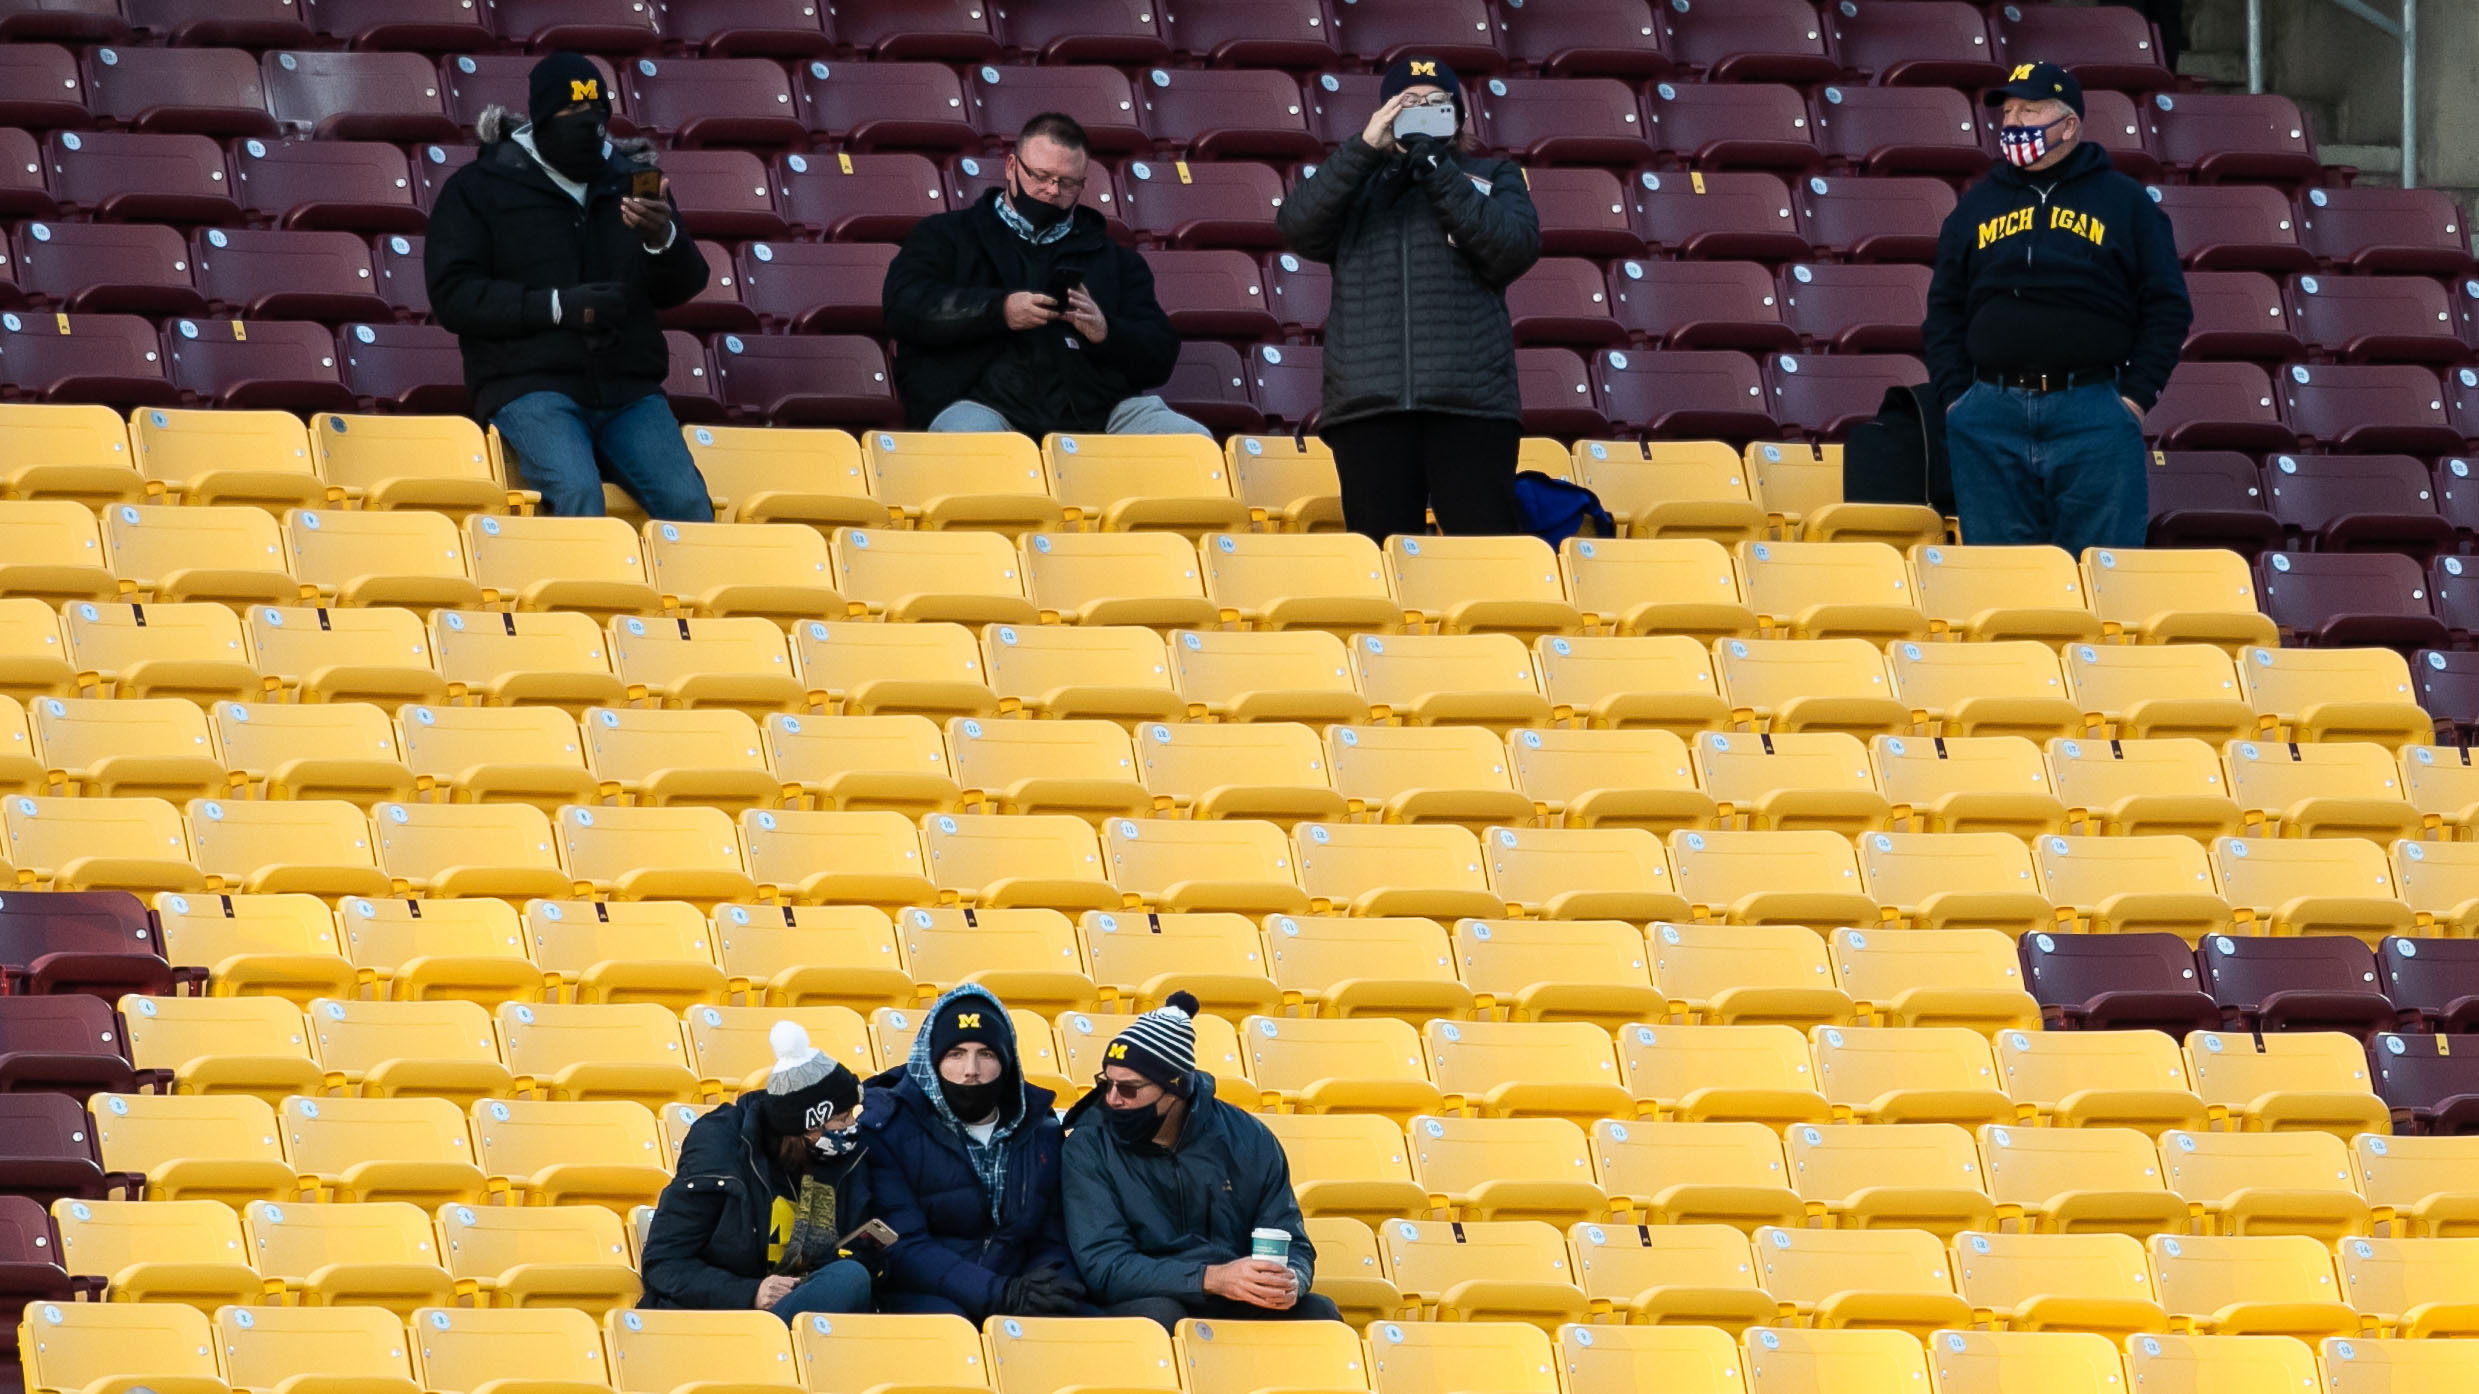 Michigan fans sitting socially distant with masks on